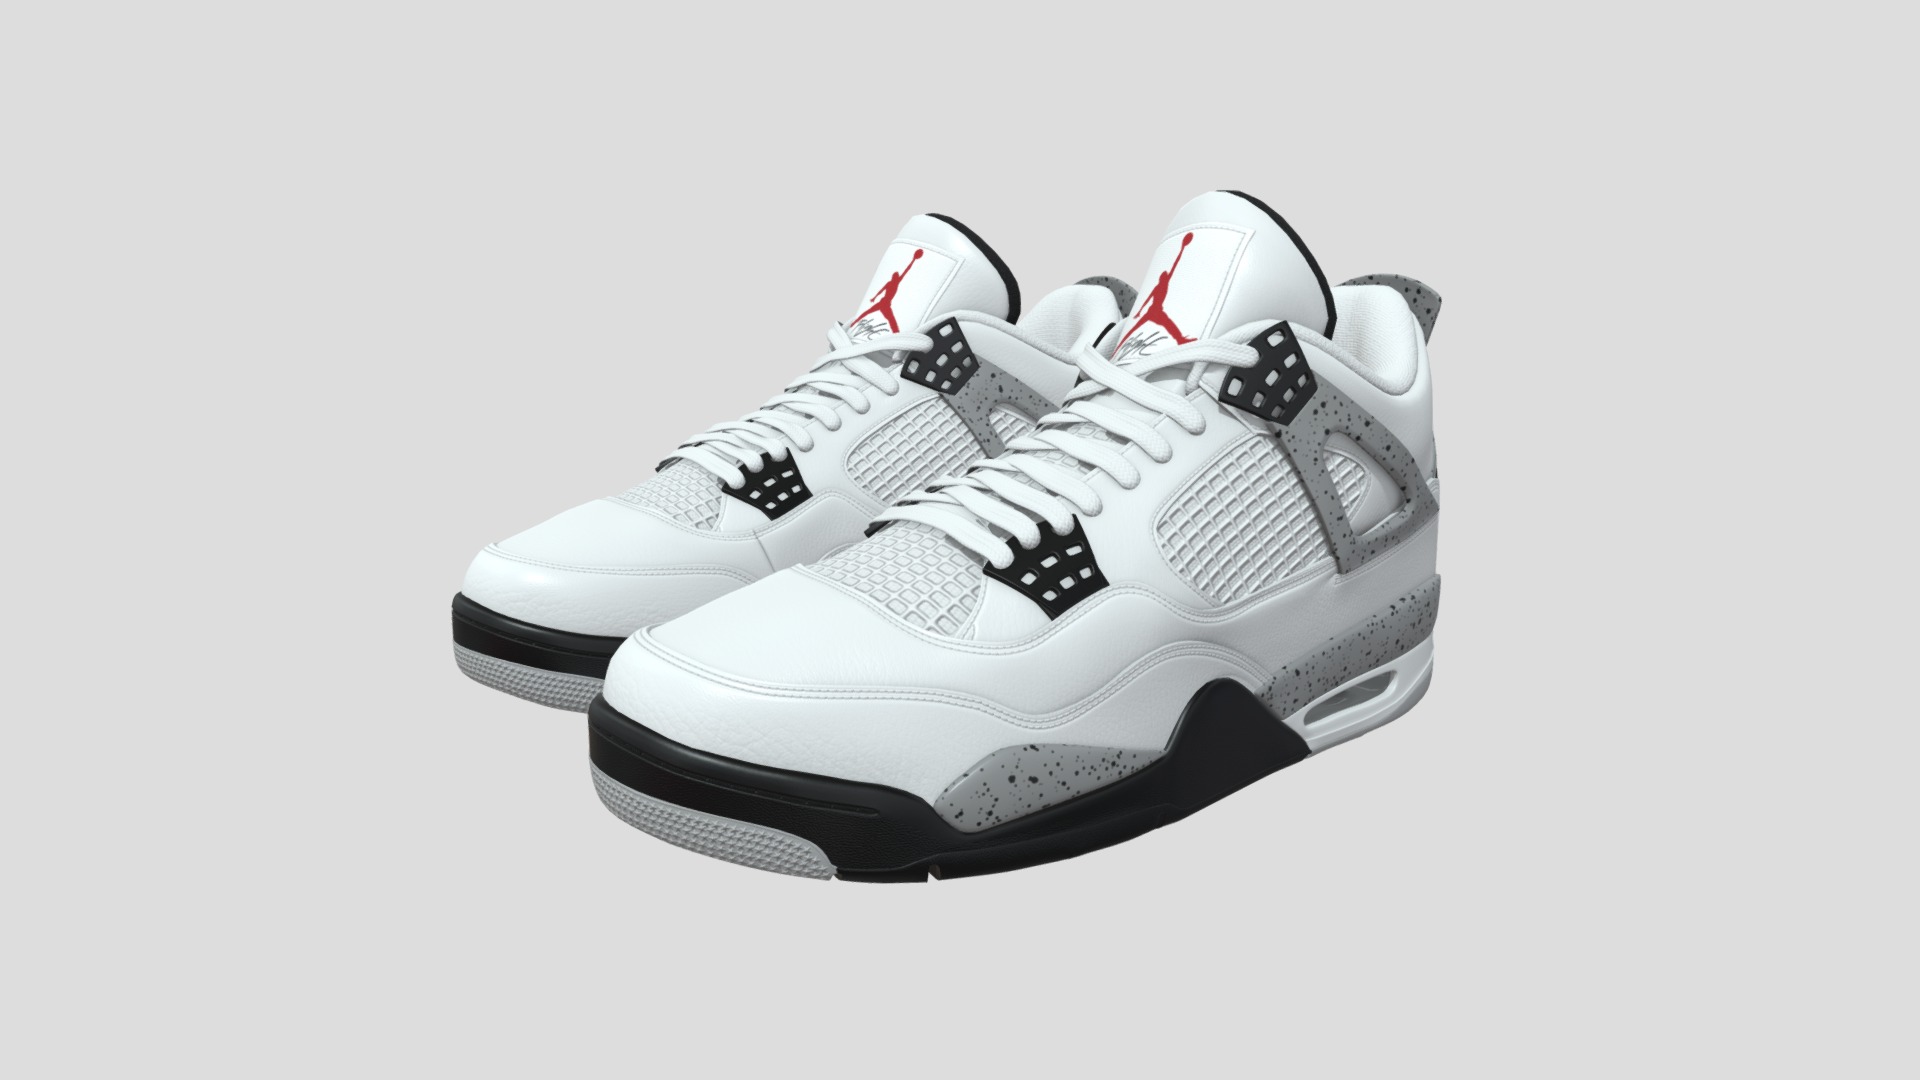 3D model Air Jordan 4 Retro Cement - This is a 3D model of the Air Jordan 4 Retro Cement. The 3D model is about a pair of white and black sneakers.